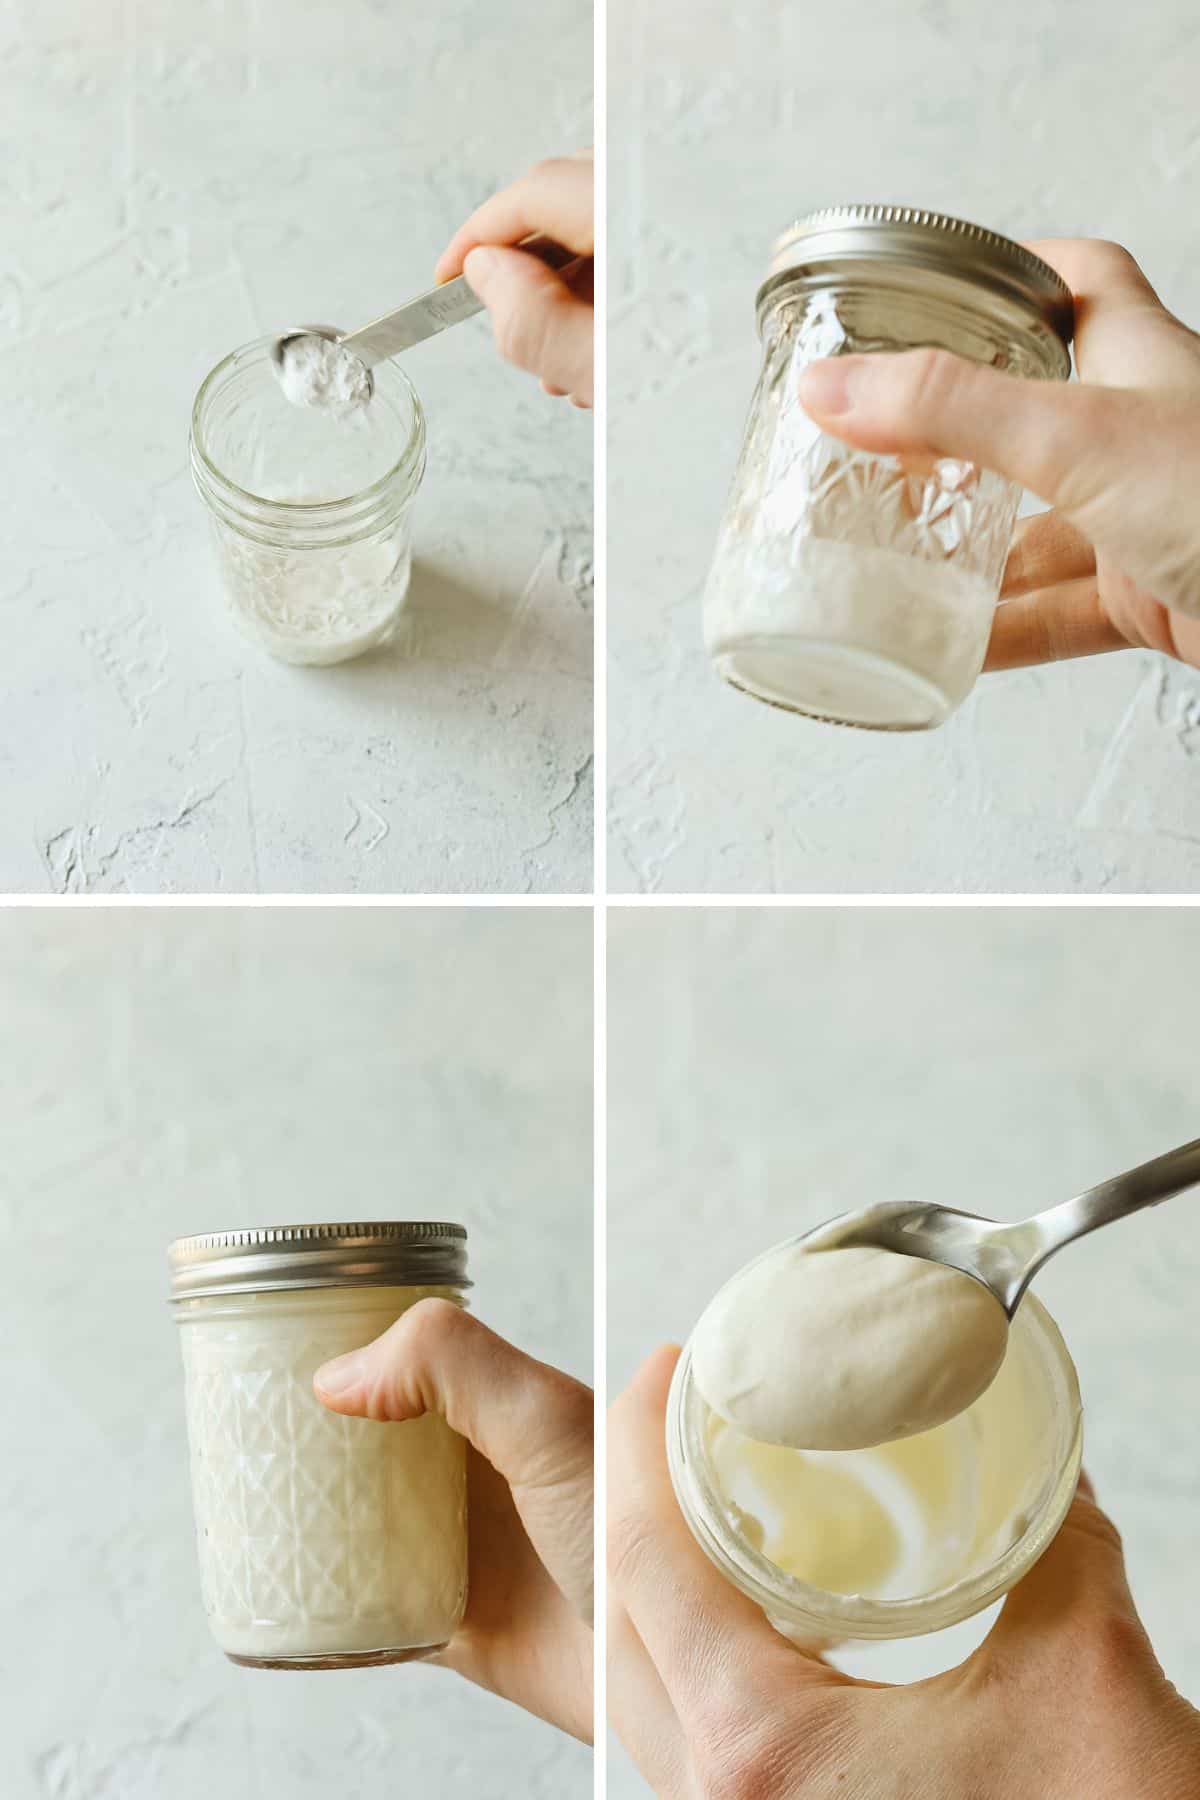 Adding ingredients to a mason jar and shaking it up to make whipped cream.